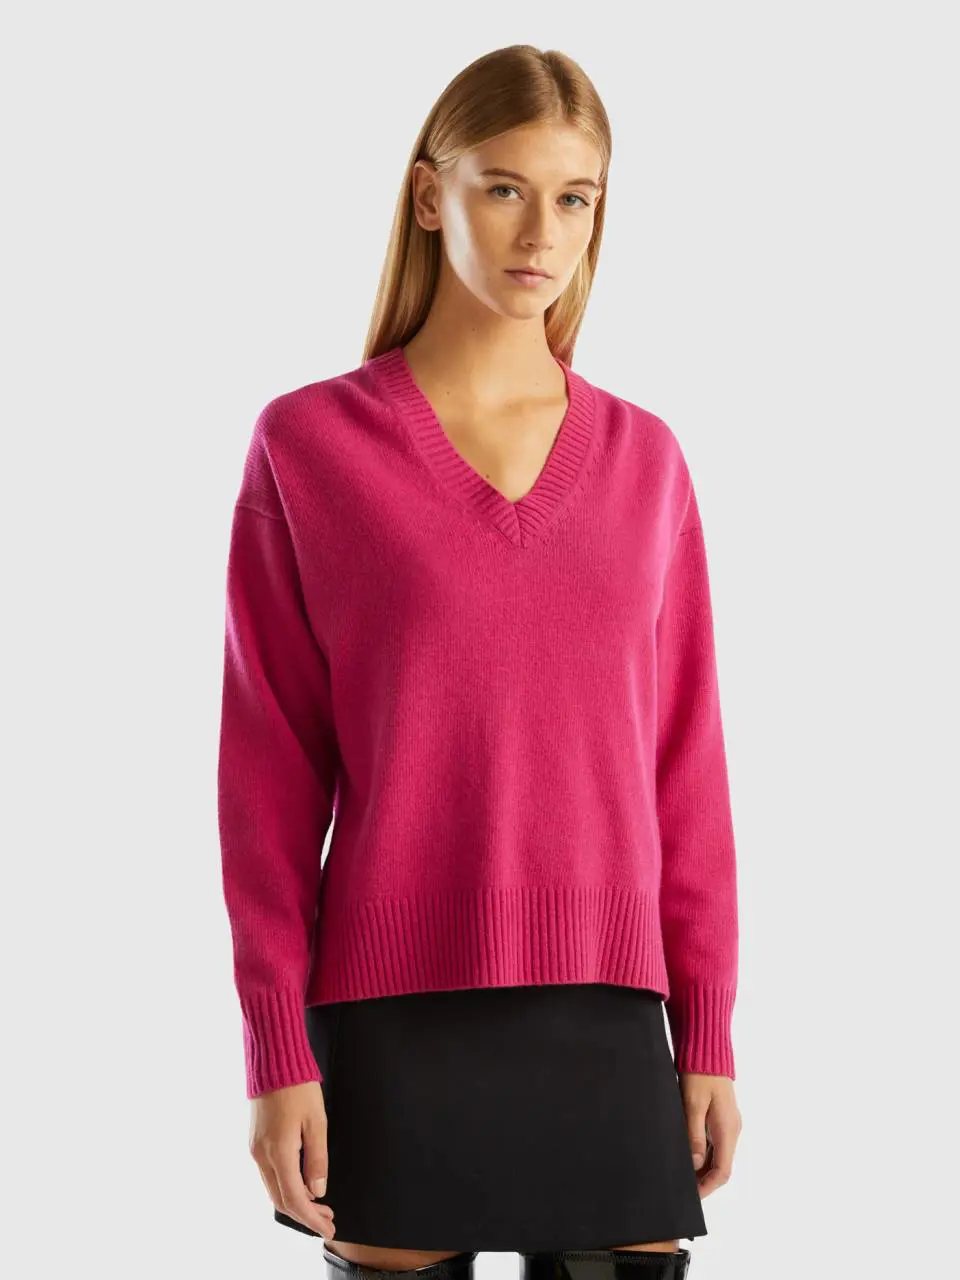 Benetton oversized fit sweater with slits. 1